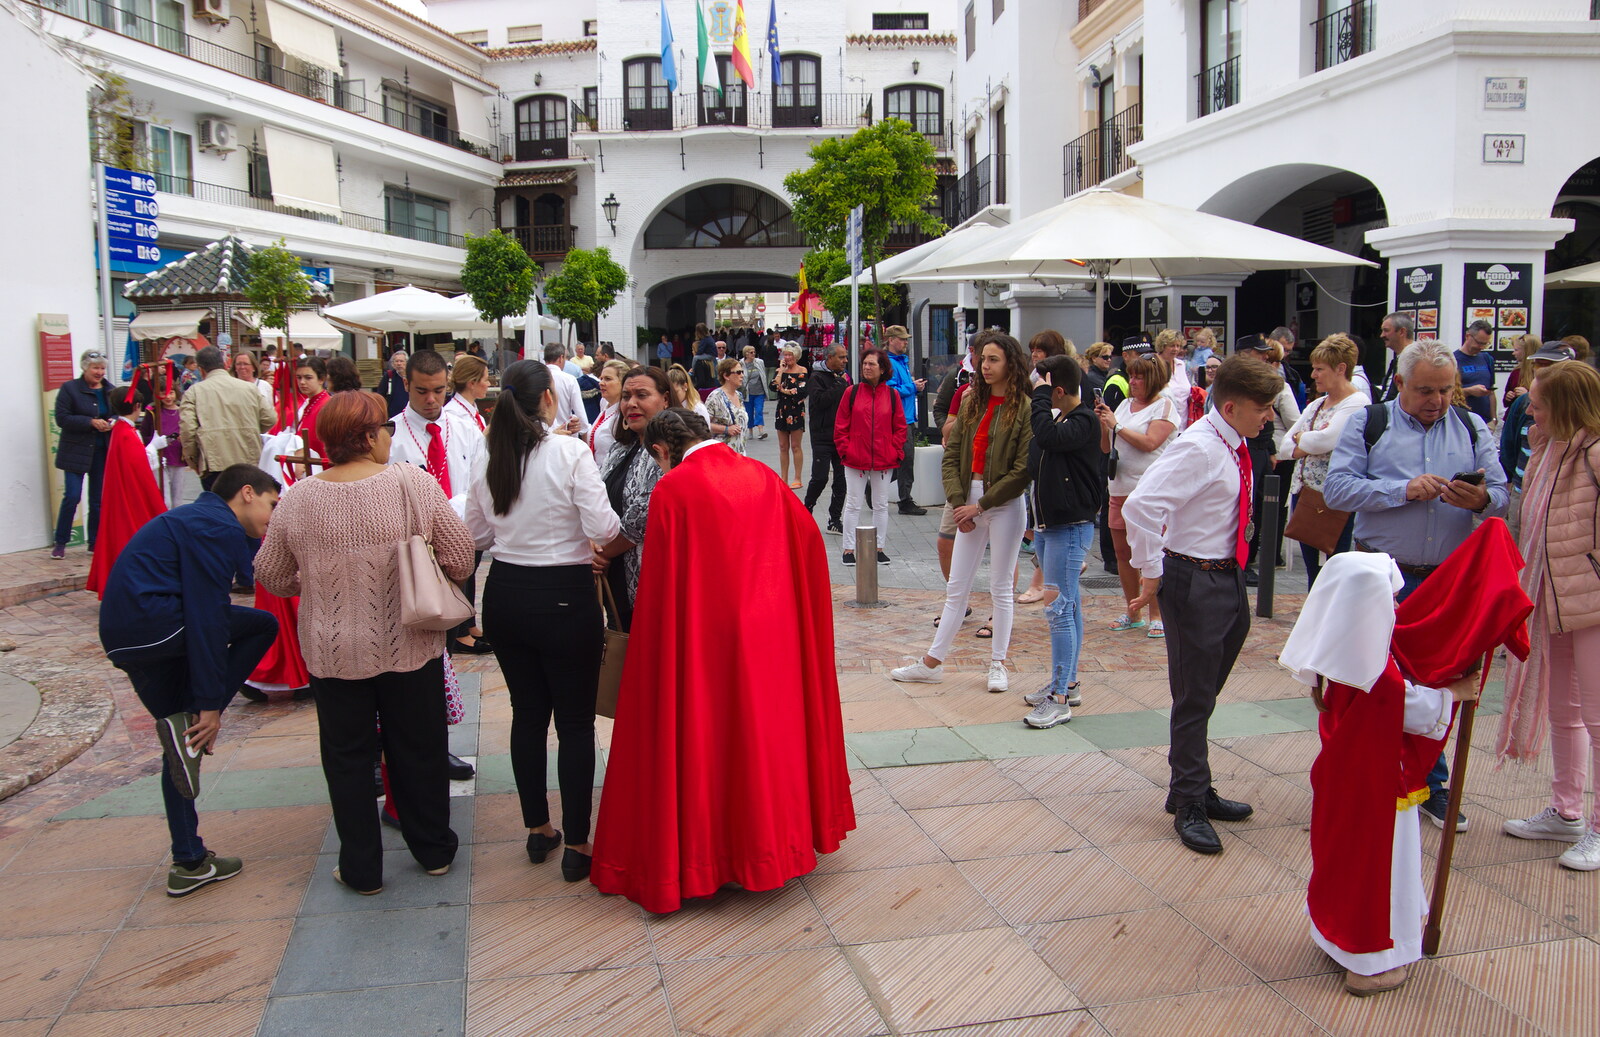 The crowds start to build up too from An Easter Parade, Nerja, Andalusia, Spain - 21st April 2019